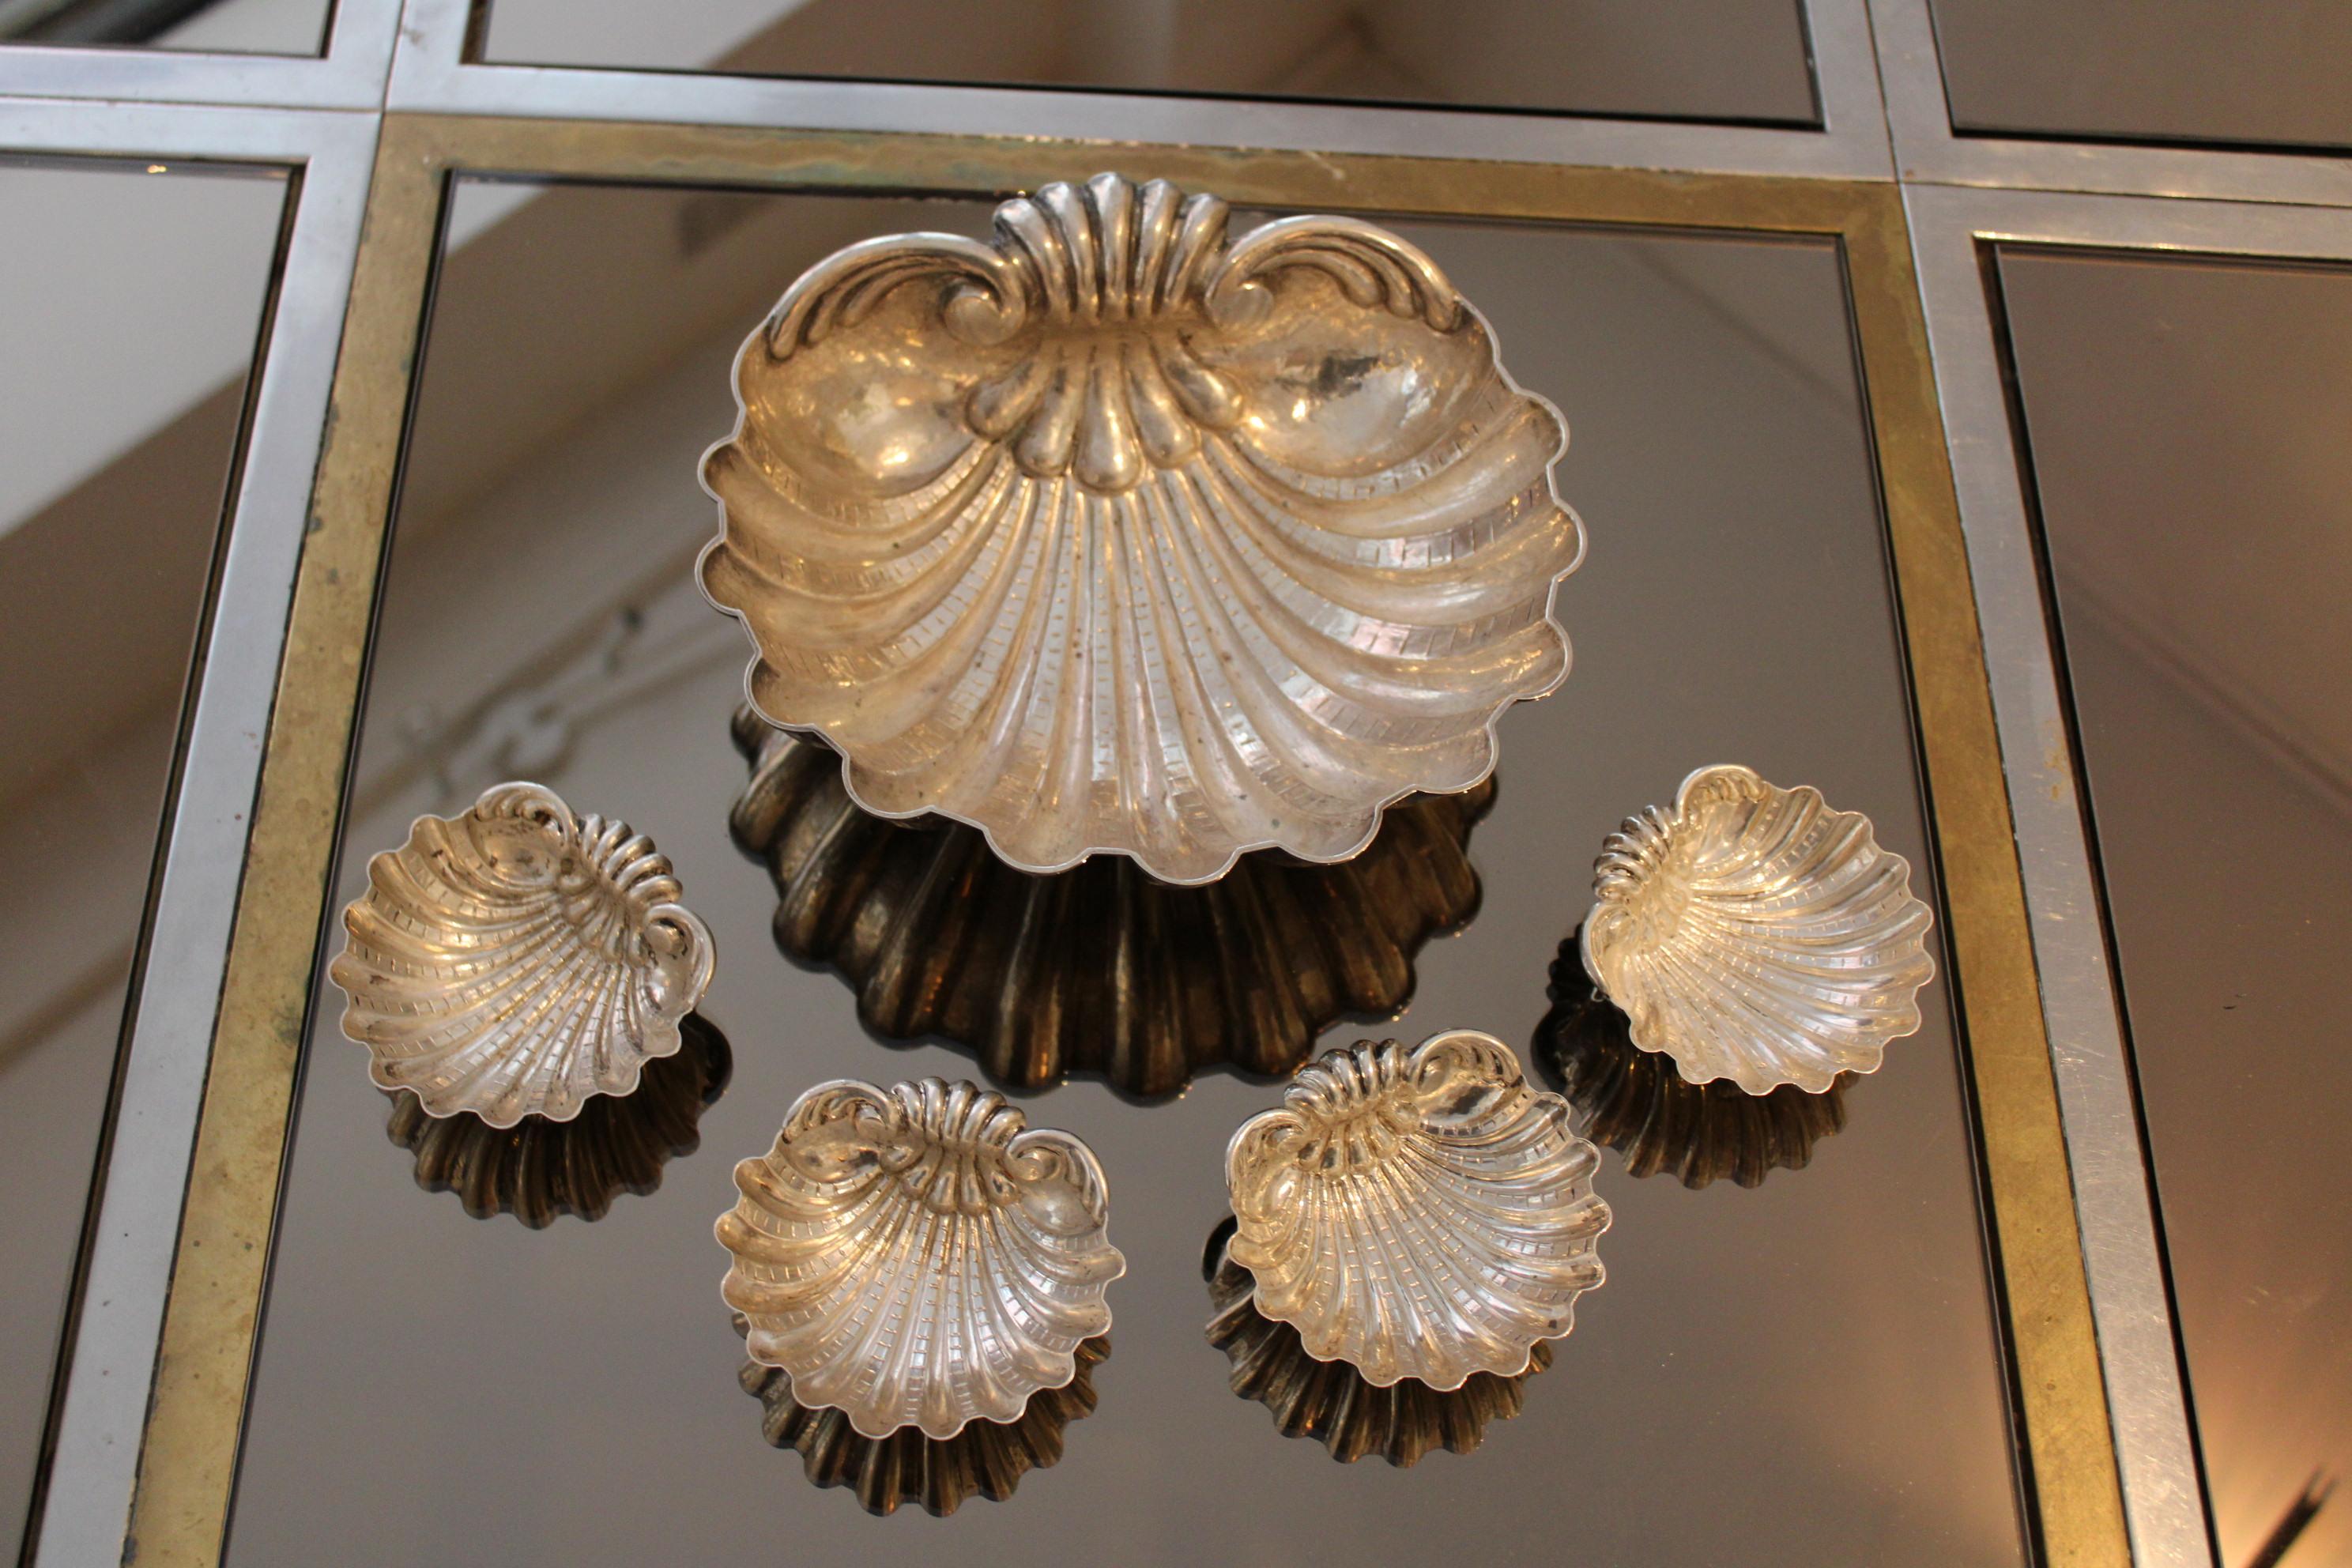 Pair of chased silver shells
Stamped Missaglia

Small shells dimensions : 9 x 9 x 3 cm
Big shell dimensions : 21 x 22 x 6 cm